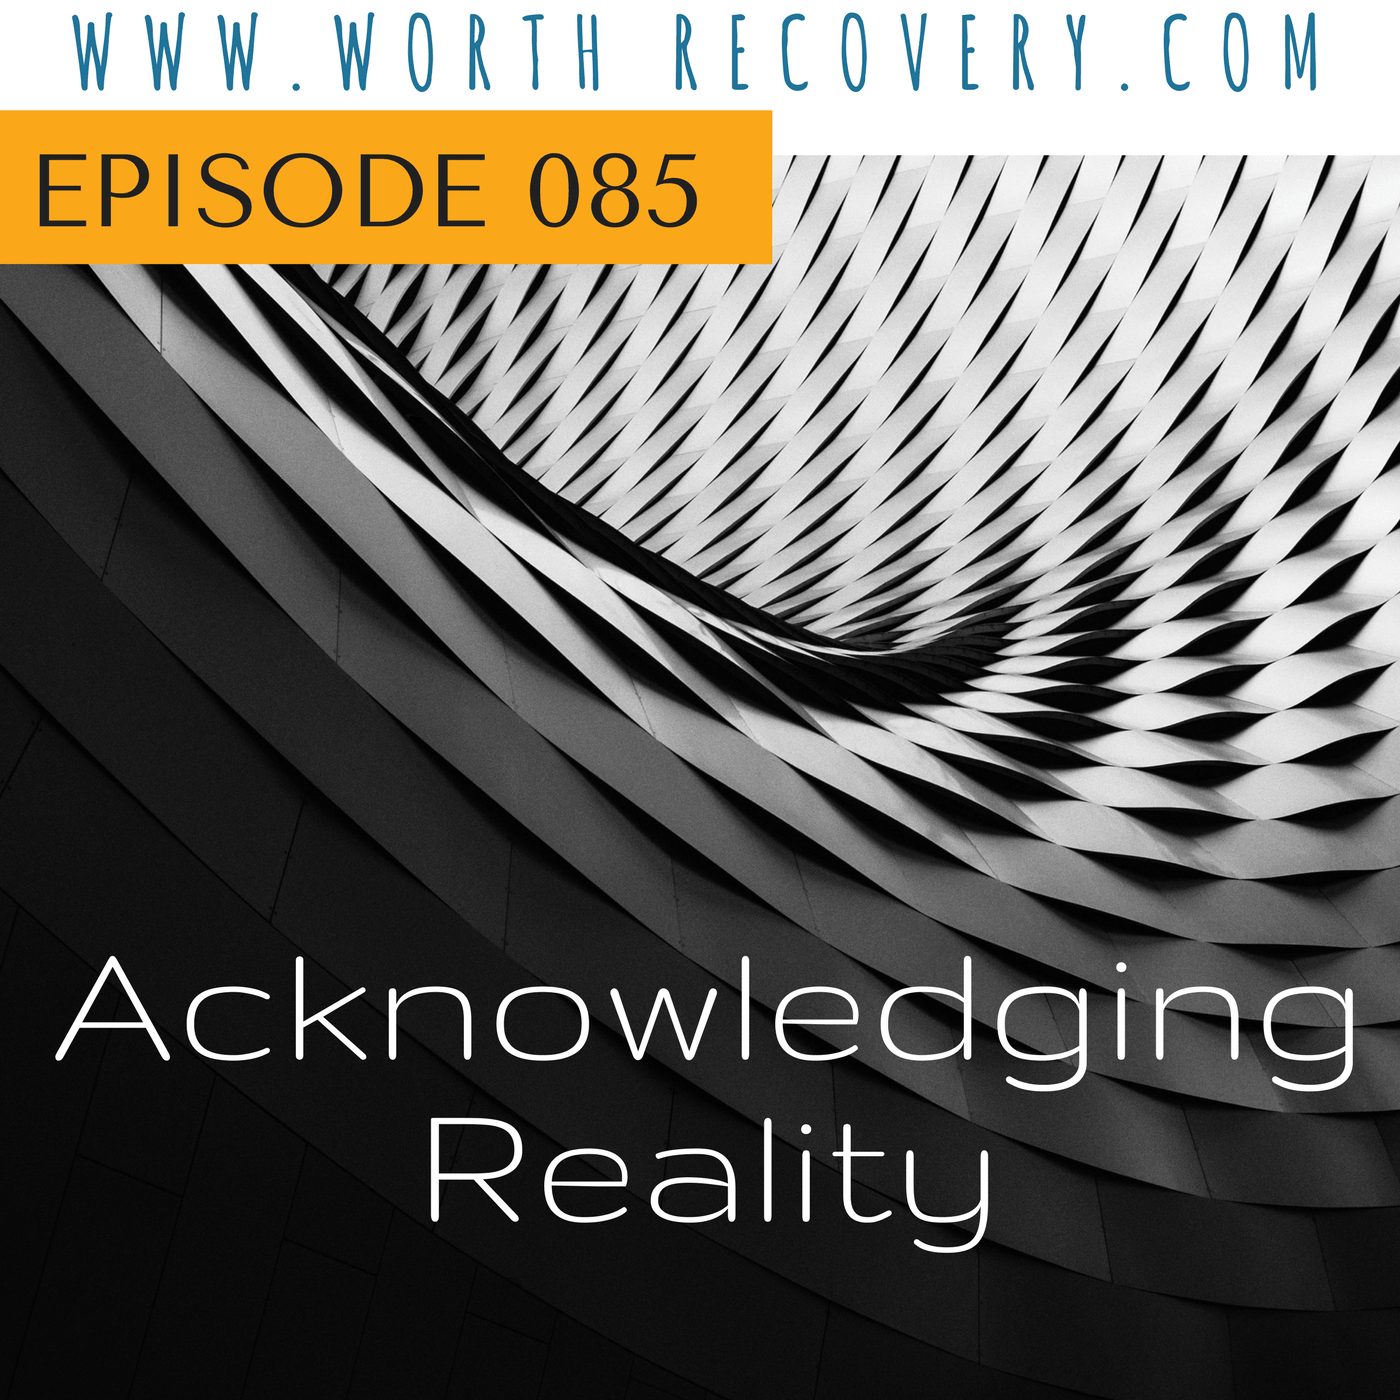 Episode 085: Acknowledging Reality